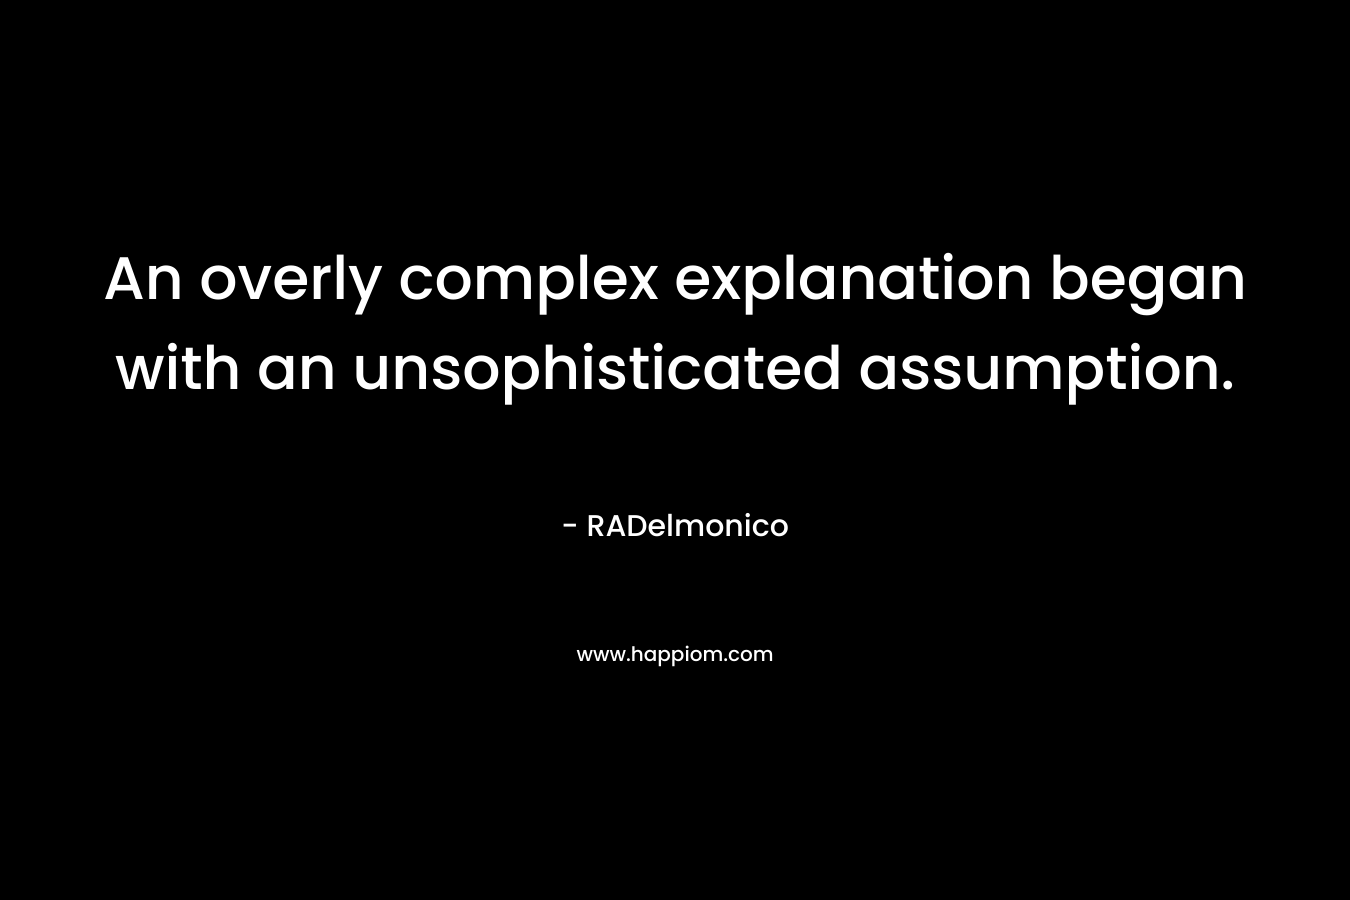 An overly complex explanation began with an unsophisticated assumption. – RADelmonico